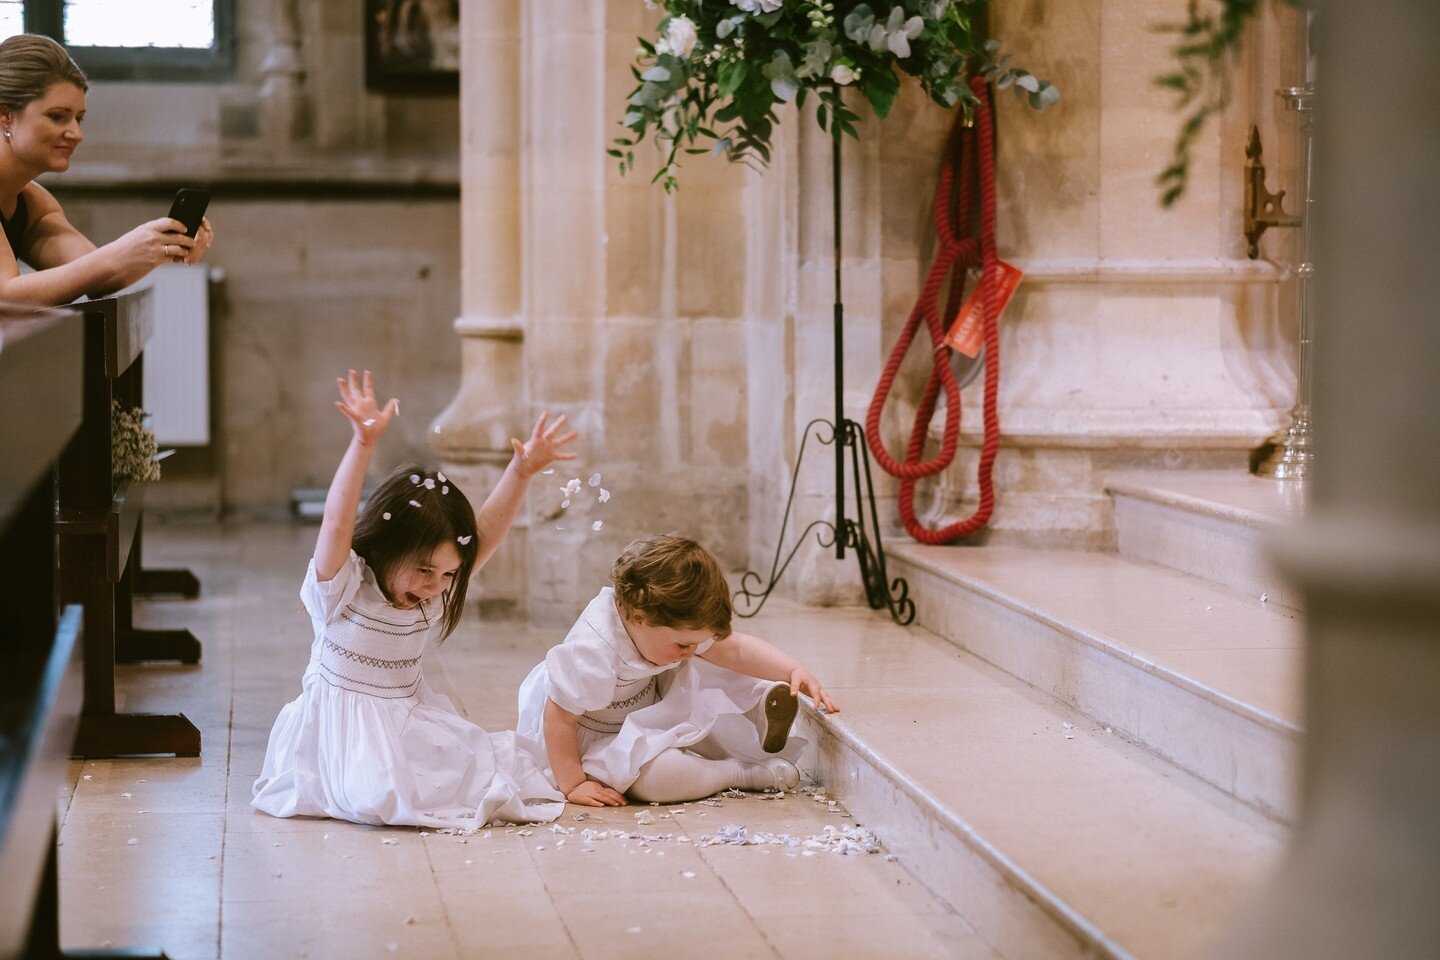 Kids at weddings always provide a huge amount of amazing photos, especially when they are left to do their own thing!⁠
⁠
#herefordweddingphotographer #weddingphotography #kidsatweddings #documentaryweddingphotography